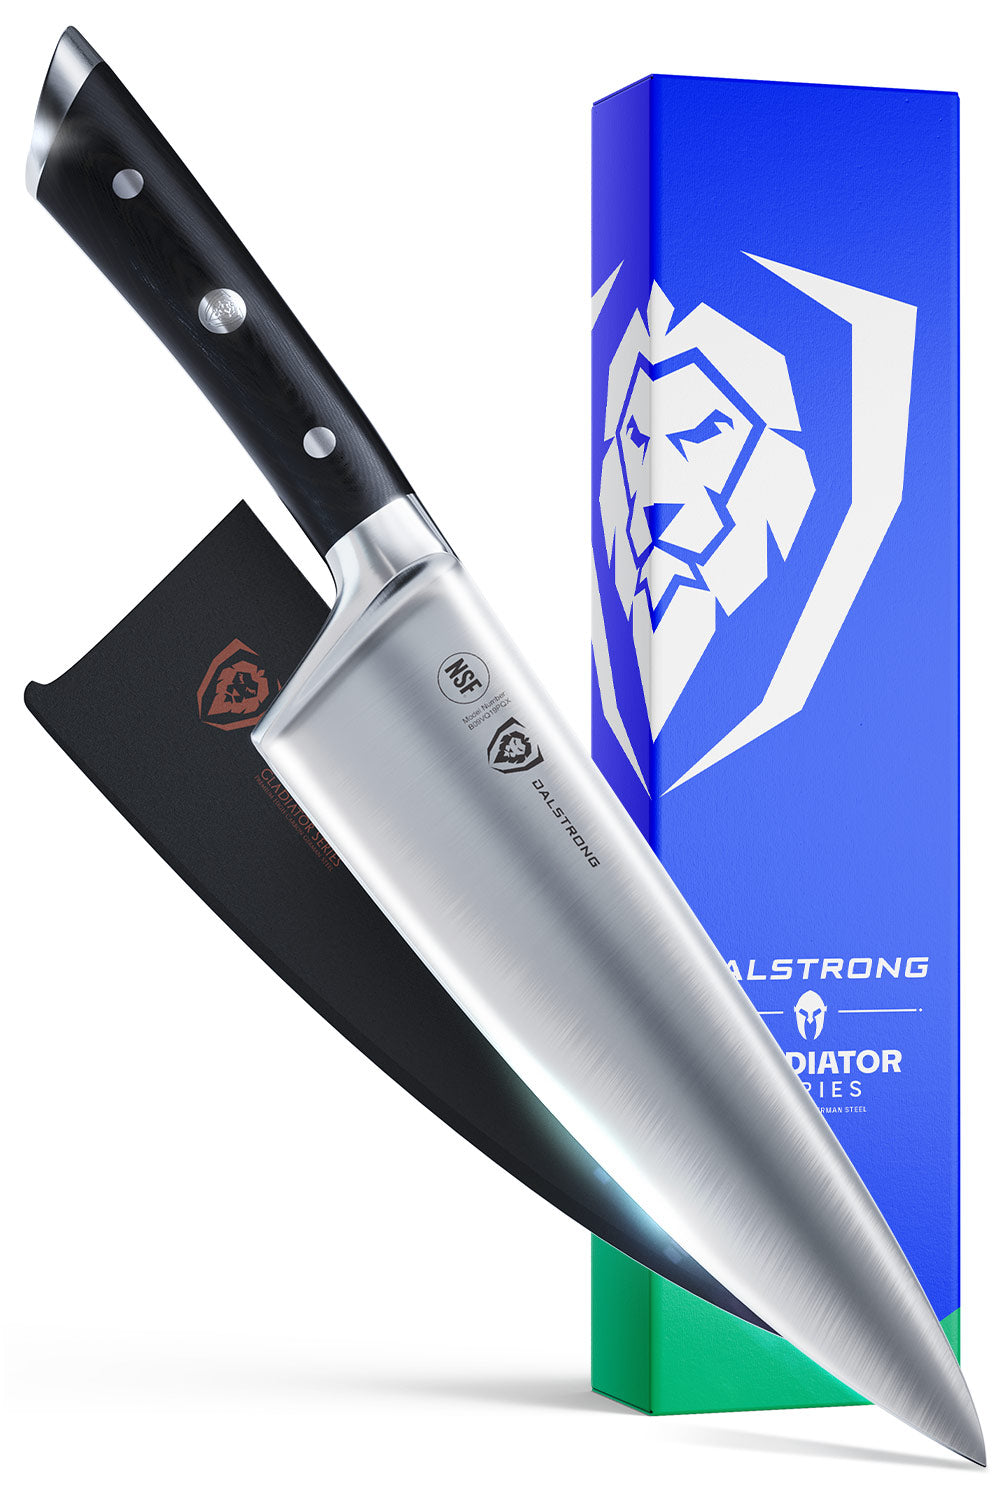 Dalstrong gladiator series 8 inch chef knife with black handle in front of it's premium packaging.